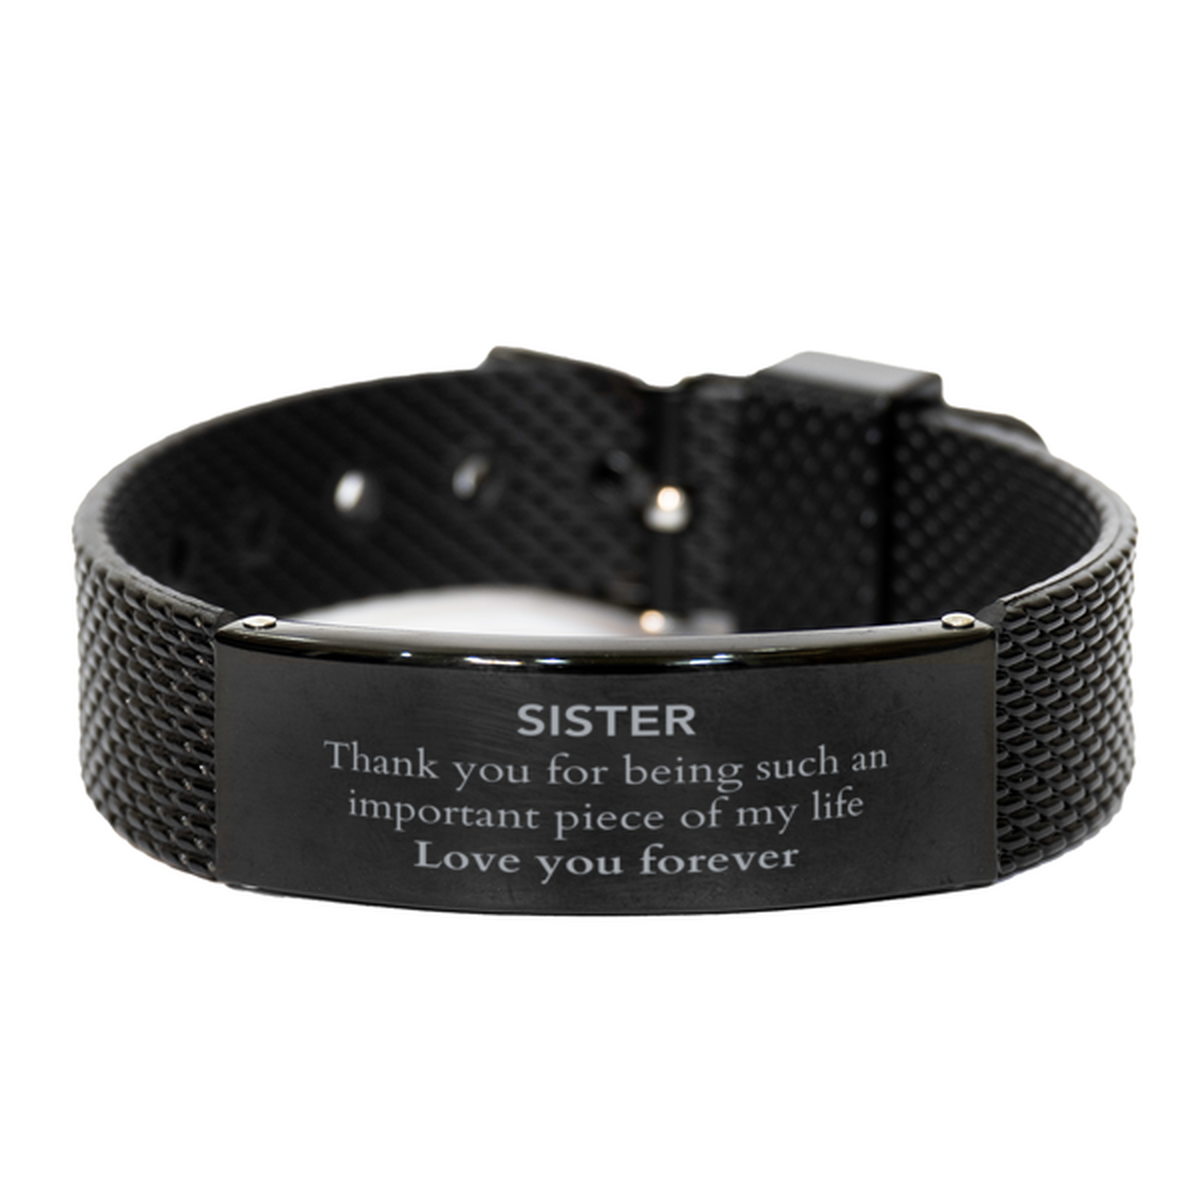 Appropriate Sister Black Shark Mesh Bracelet Epic Birthday Gifts for Sister Thank you for being such an important piece of my life Sister Christmas Mothers Fathers Day